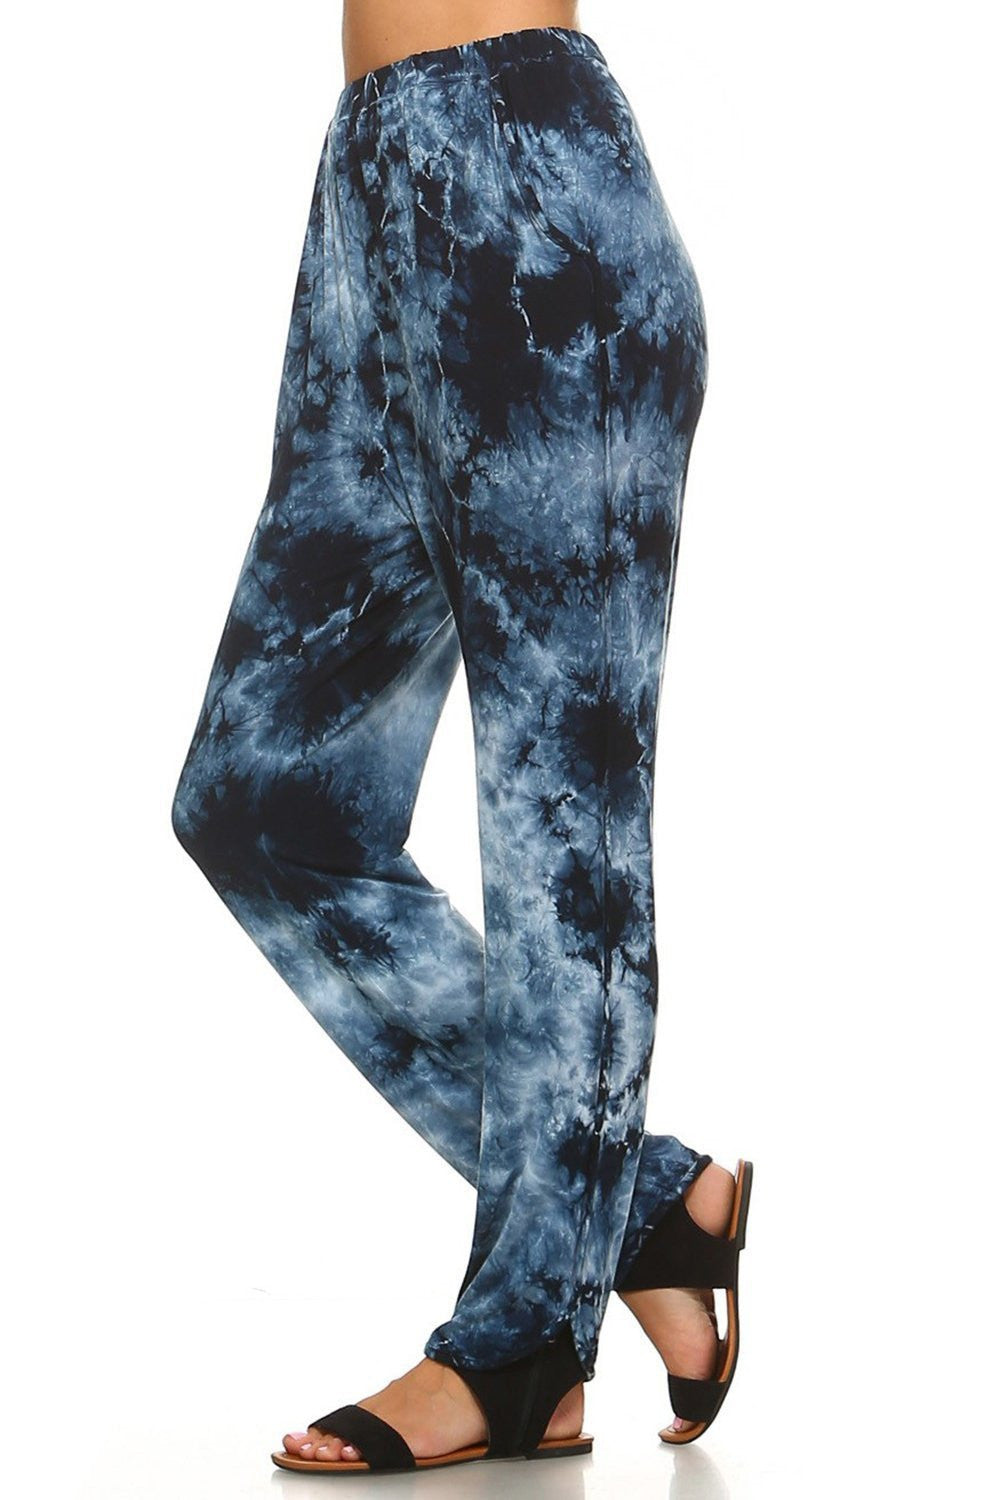 sideways view Cloud Tie dye Lounge pants are perfect for any activity.